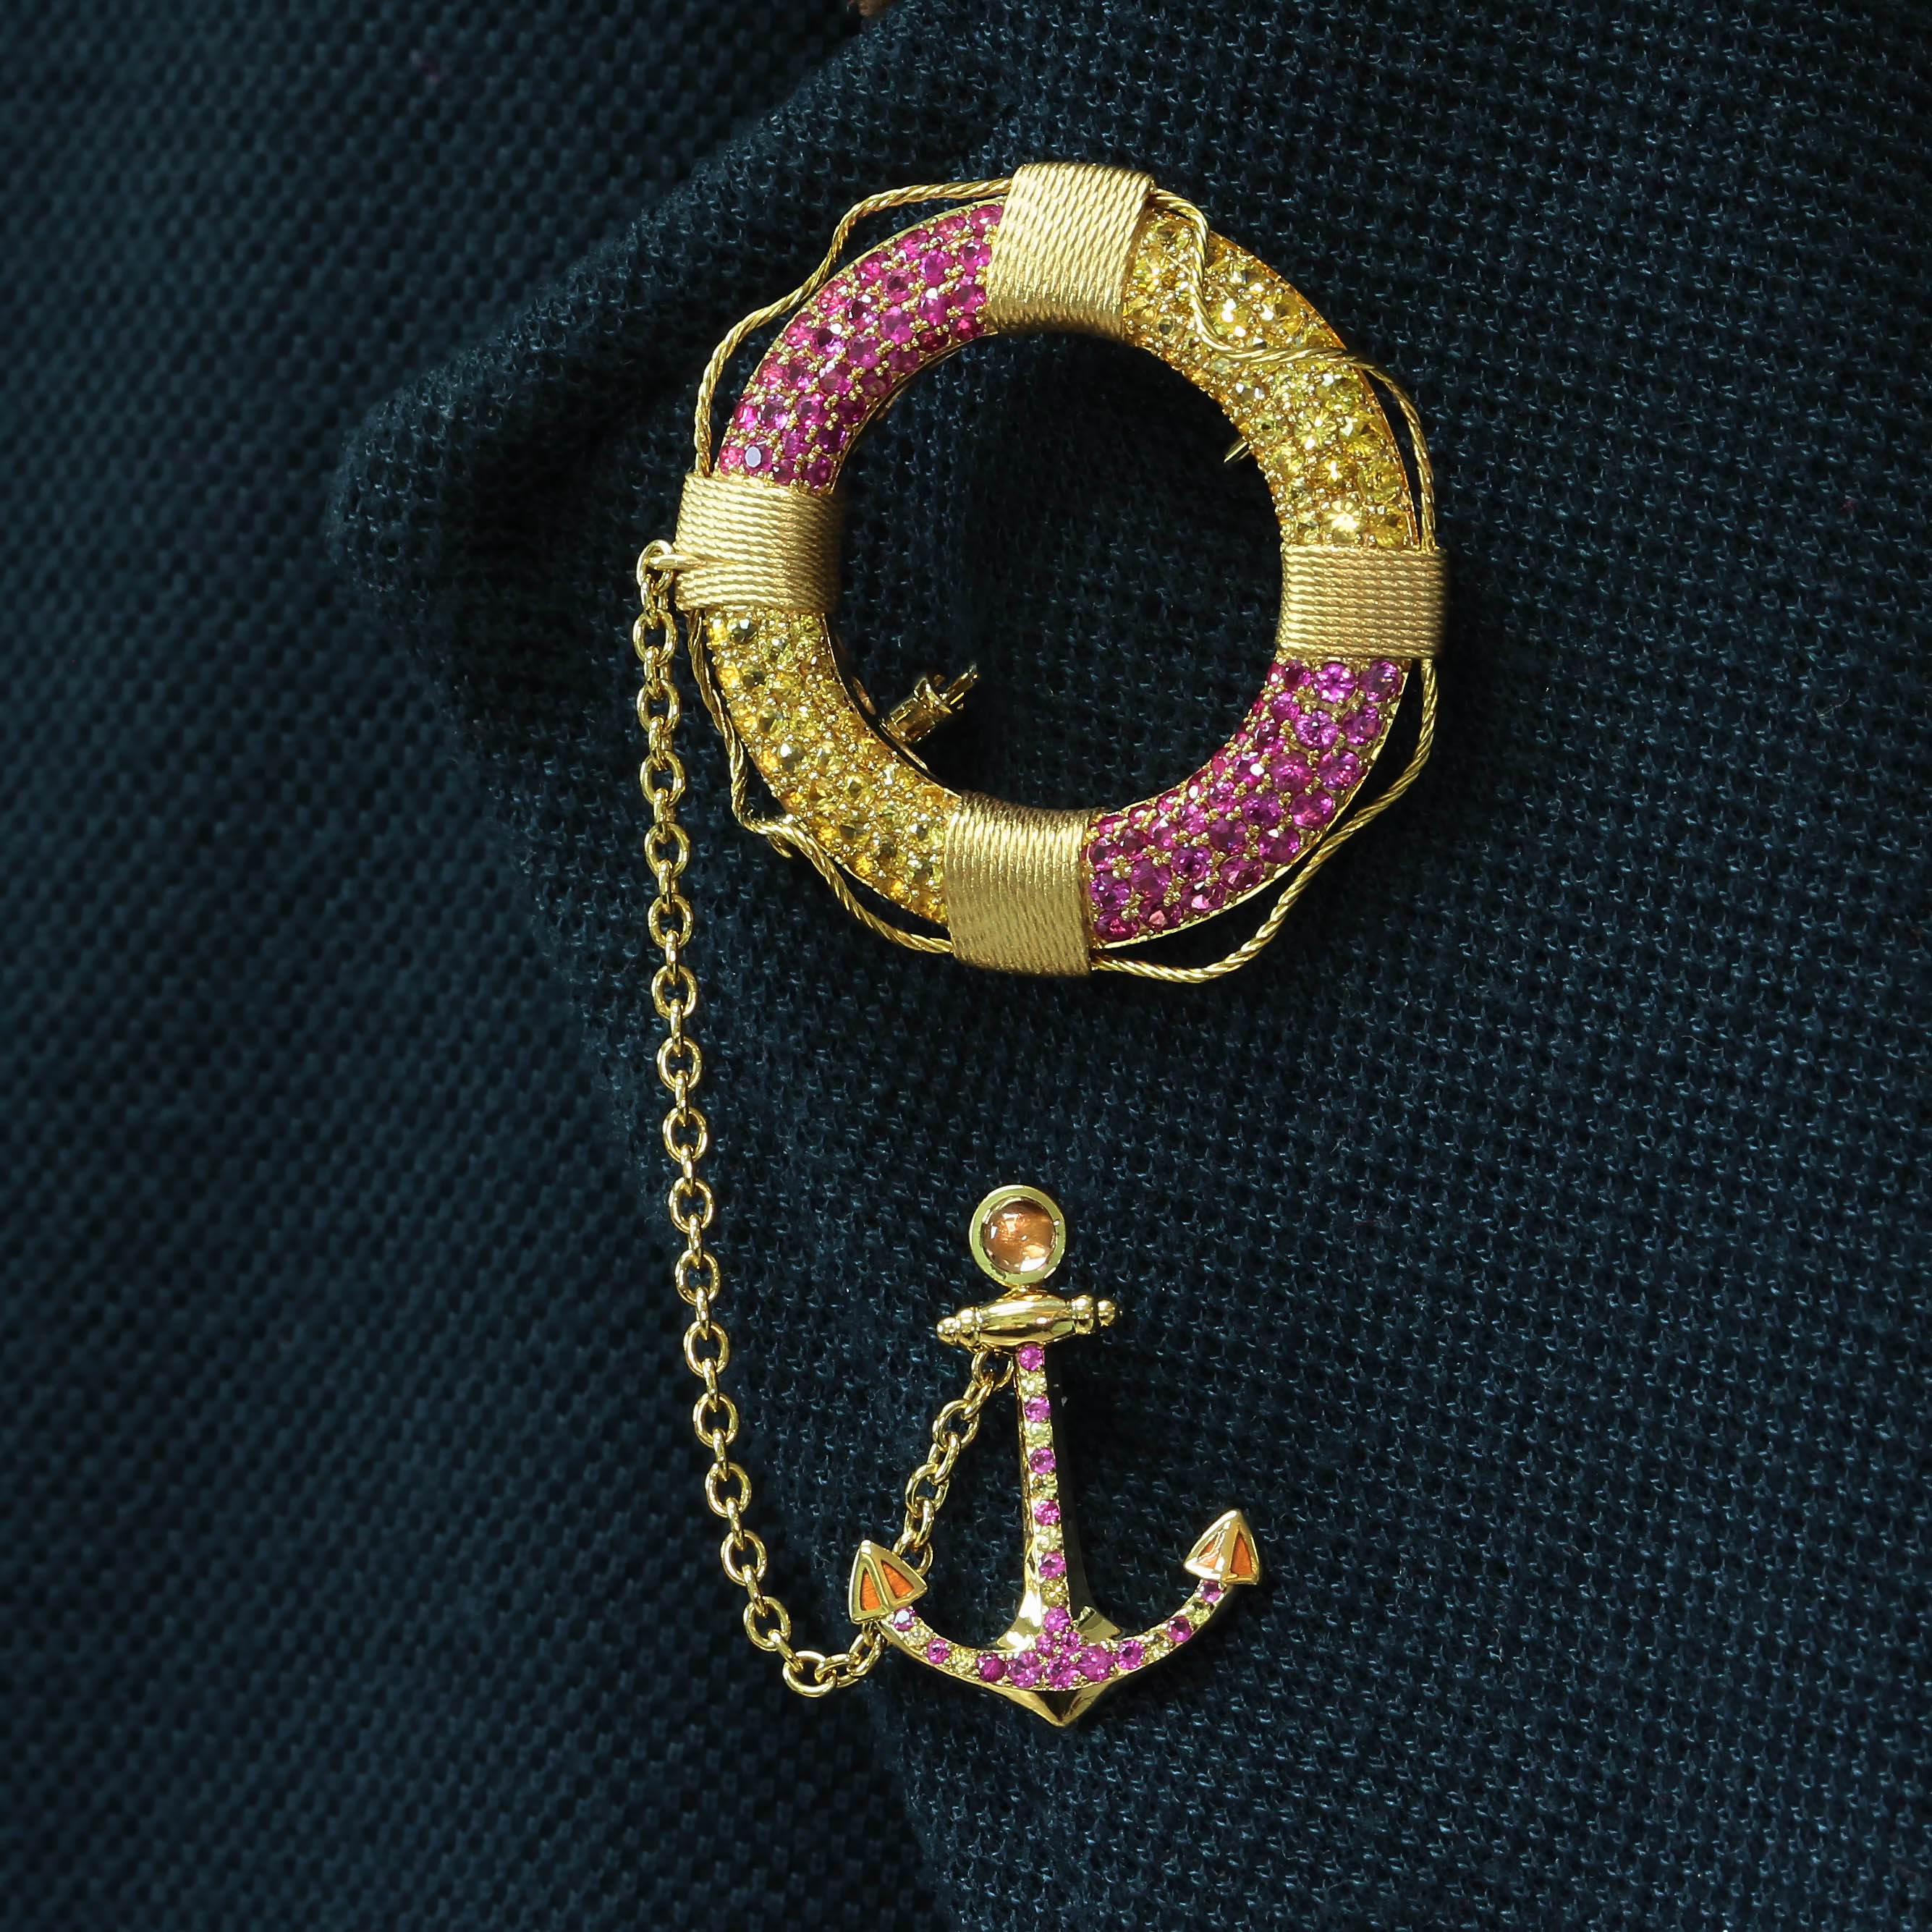 Brs 0293-0, 18K Yellow Gold, Sapphires Lifebuoy Brooch